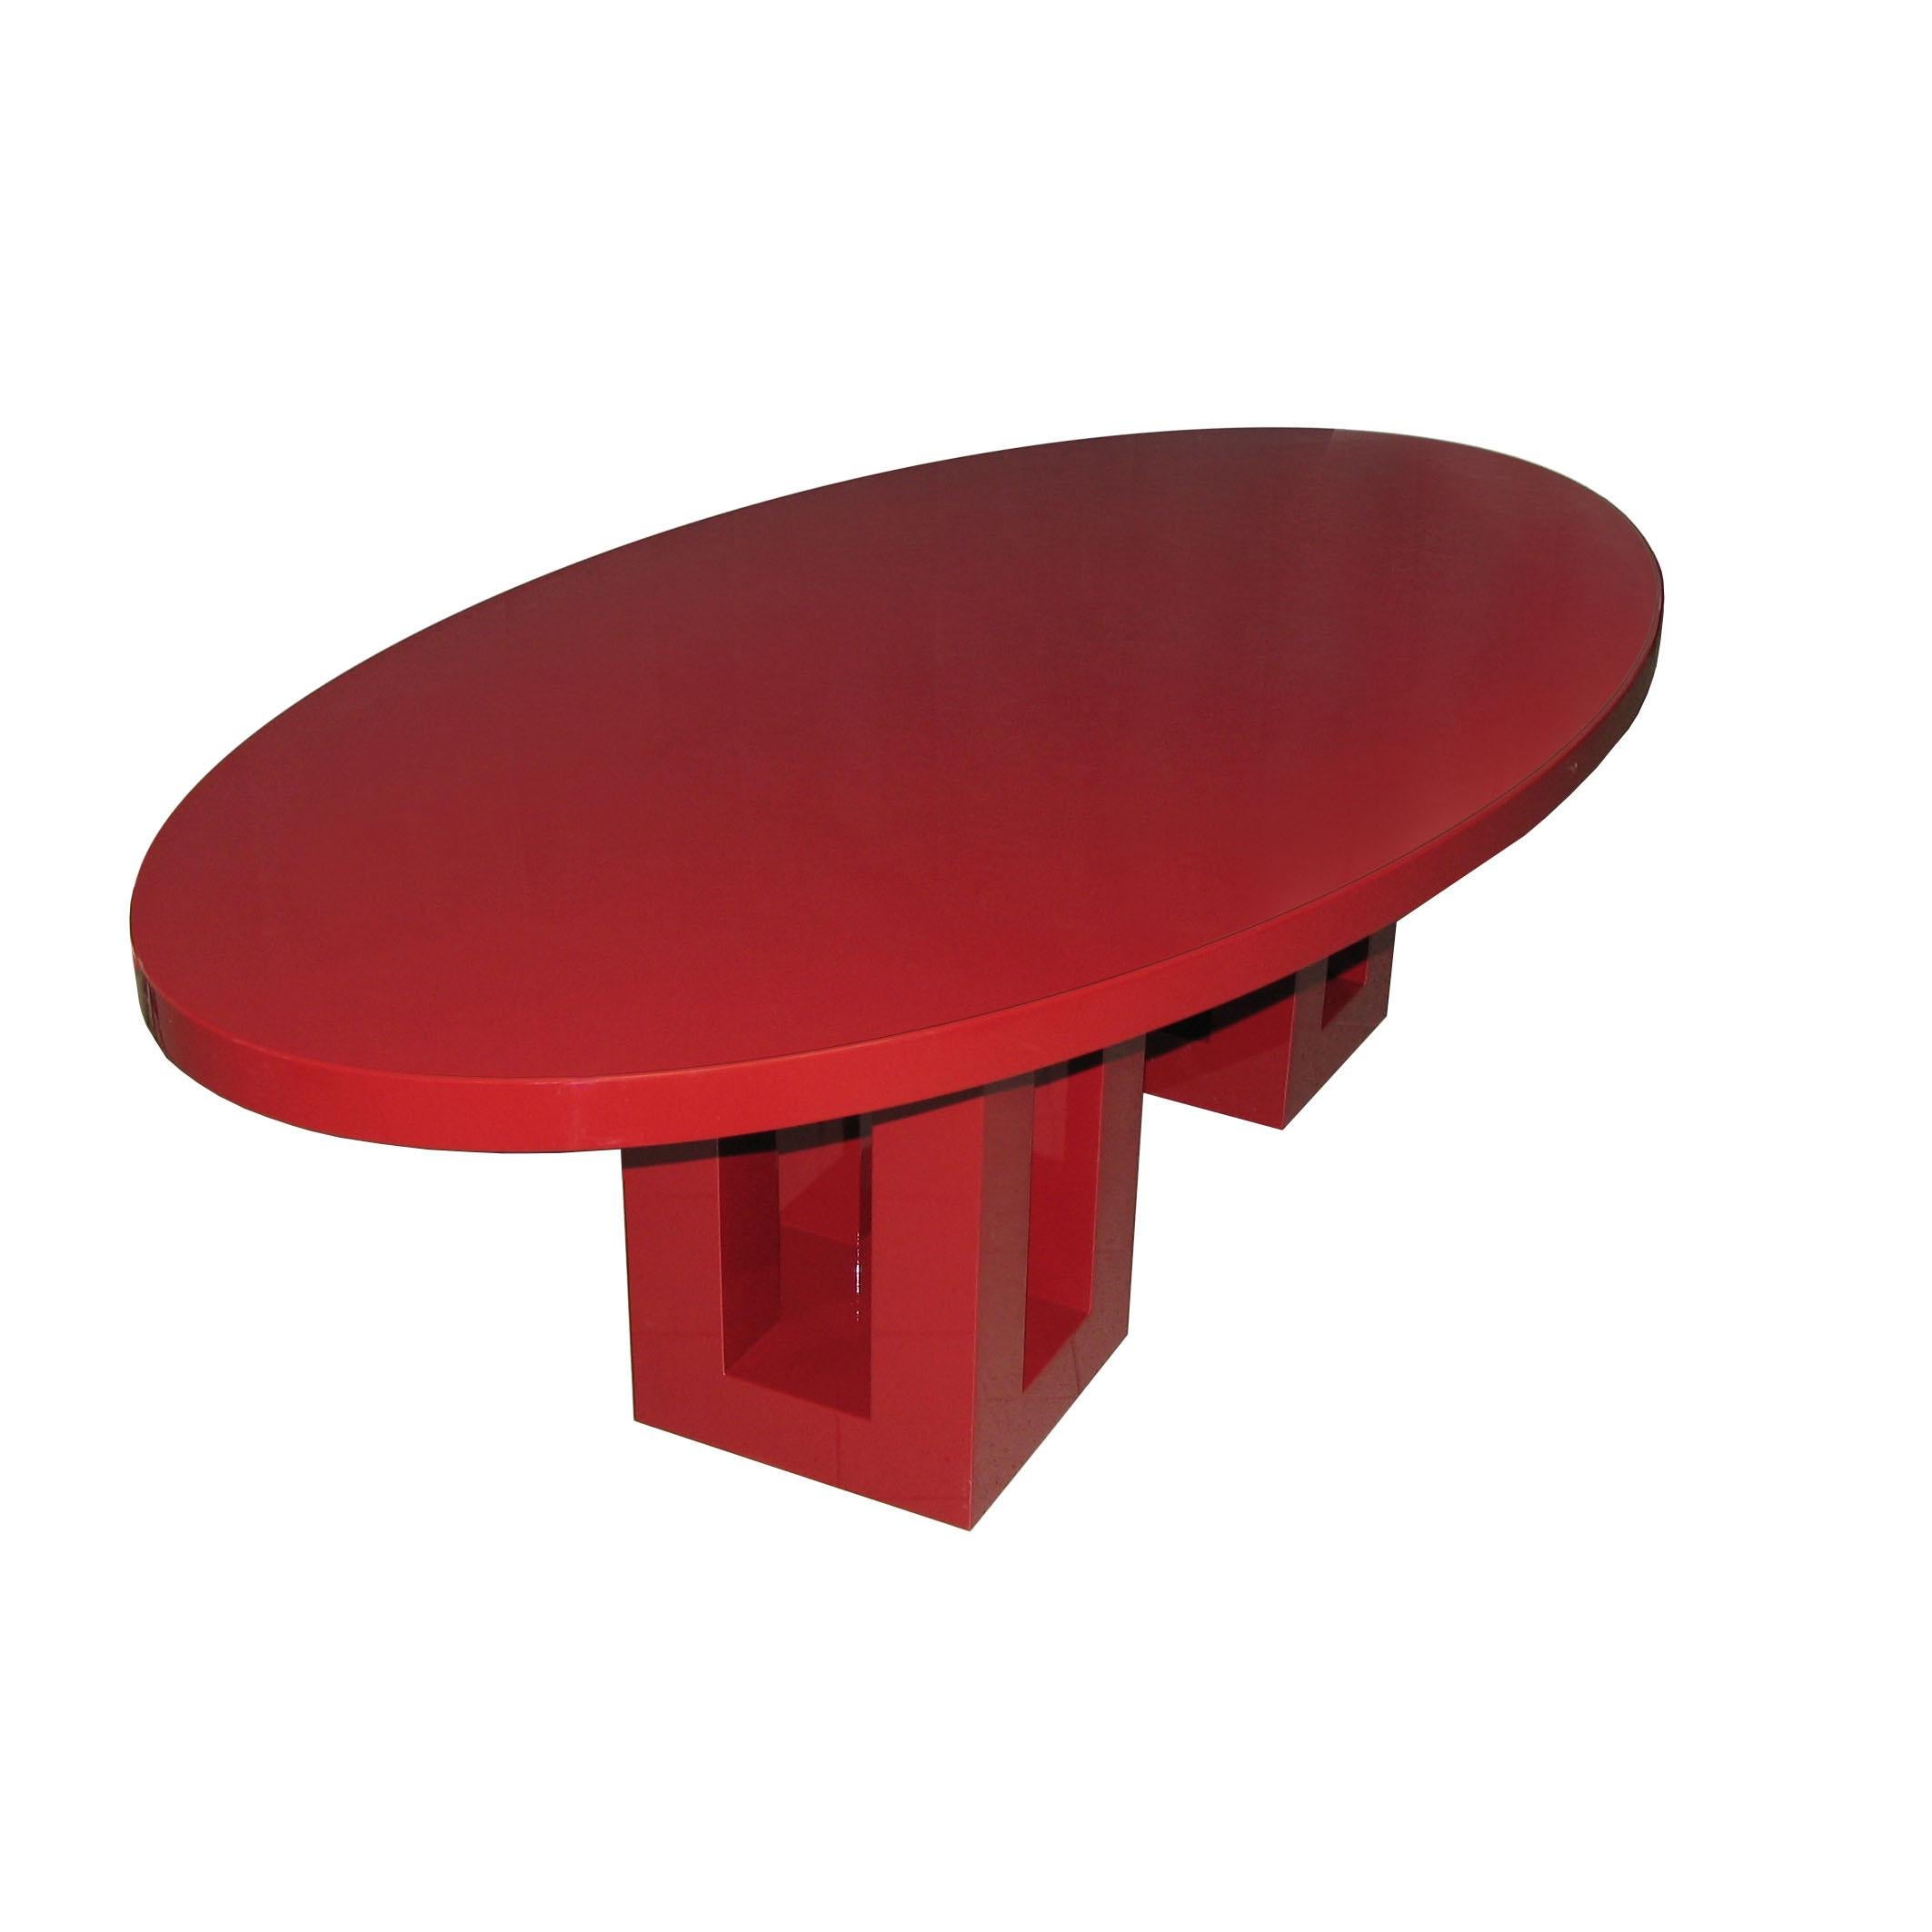 Large Red Lacquer Oval Dinning Table. 8 Feet, Francois Champsaur, France 1990s In Excellent Condition For Sale In Bochum, NRW